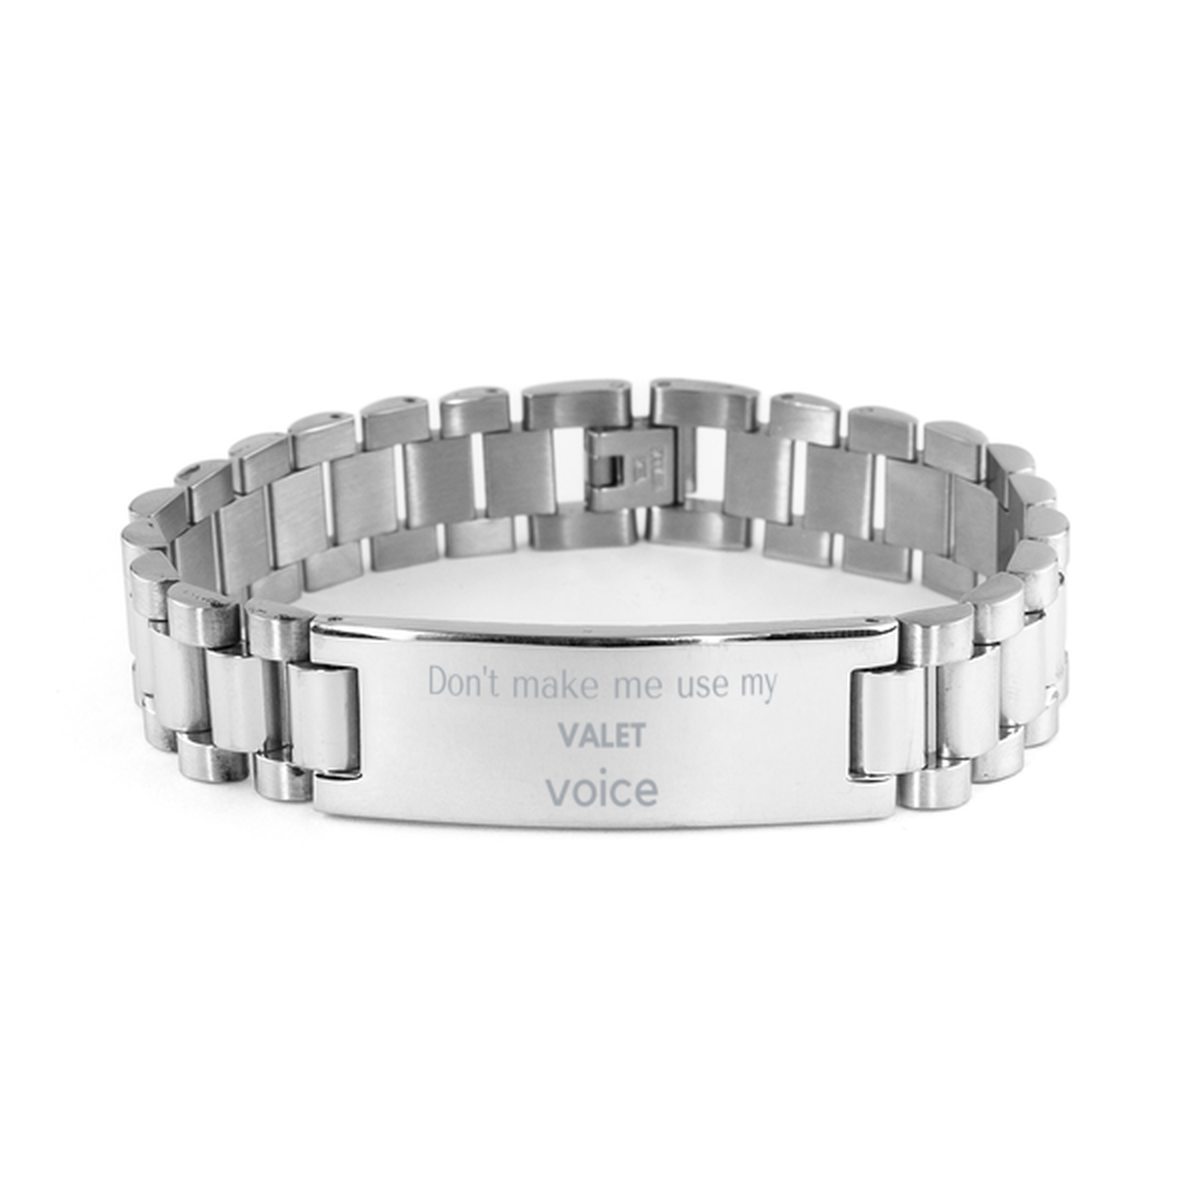 Don't make me use my Valet voice, Sarcasm Valet Gifts, Christmas Valet Ladder Stainless Steel Bracelet Birthday Unique Gifts For Valet Coworkers, Men, Women, Colleague, Friends